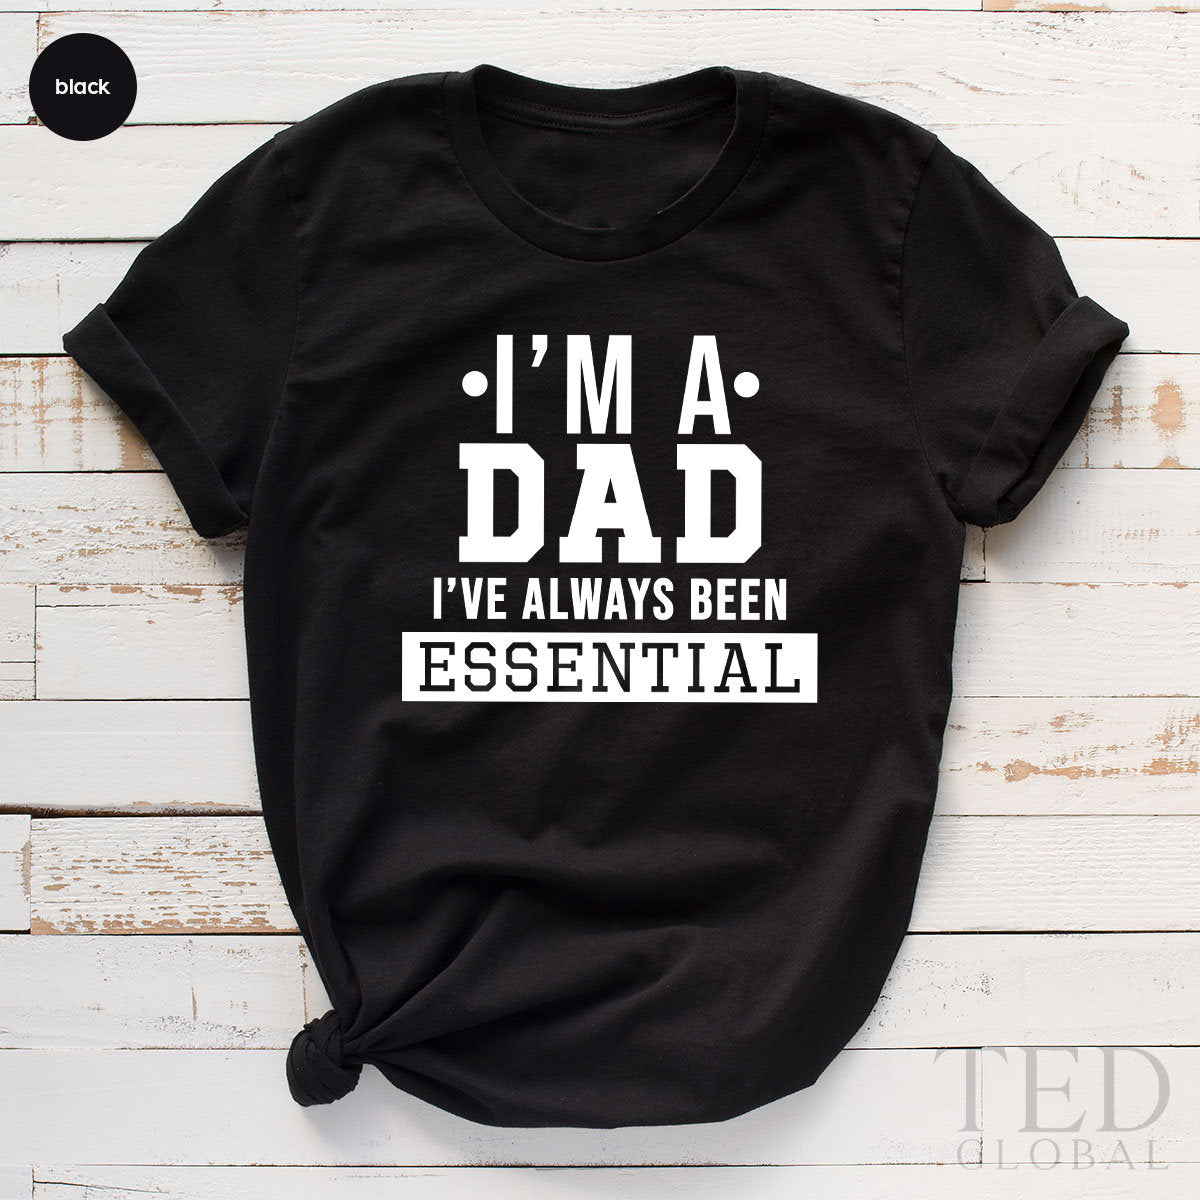 Essential Dad Shirt, Fathers Day Tee, Fathers Day Gifts, New Dad Shirt, Nurse Dad Shirt, I'm Essential Shirt, Gift For Dad, Gift For Husband - Fastdeliverytees.com